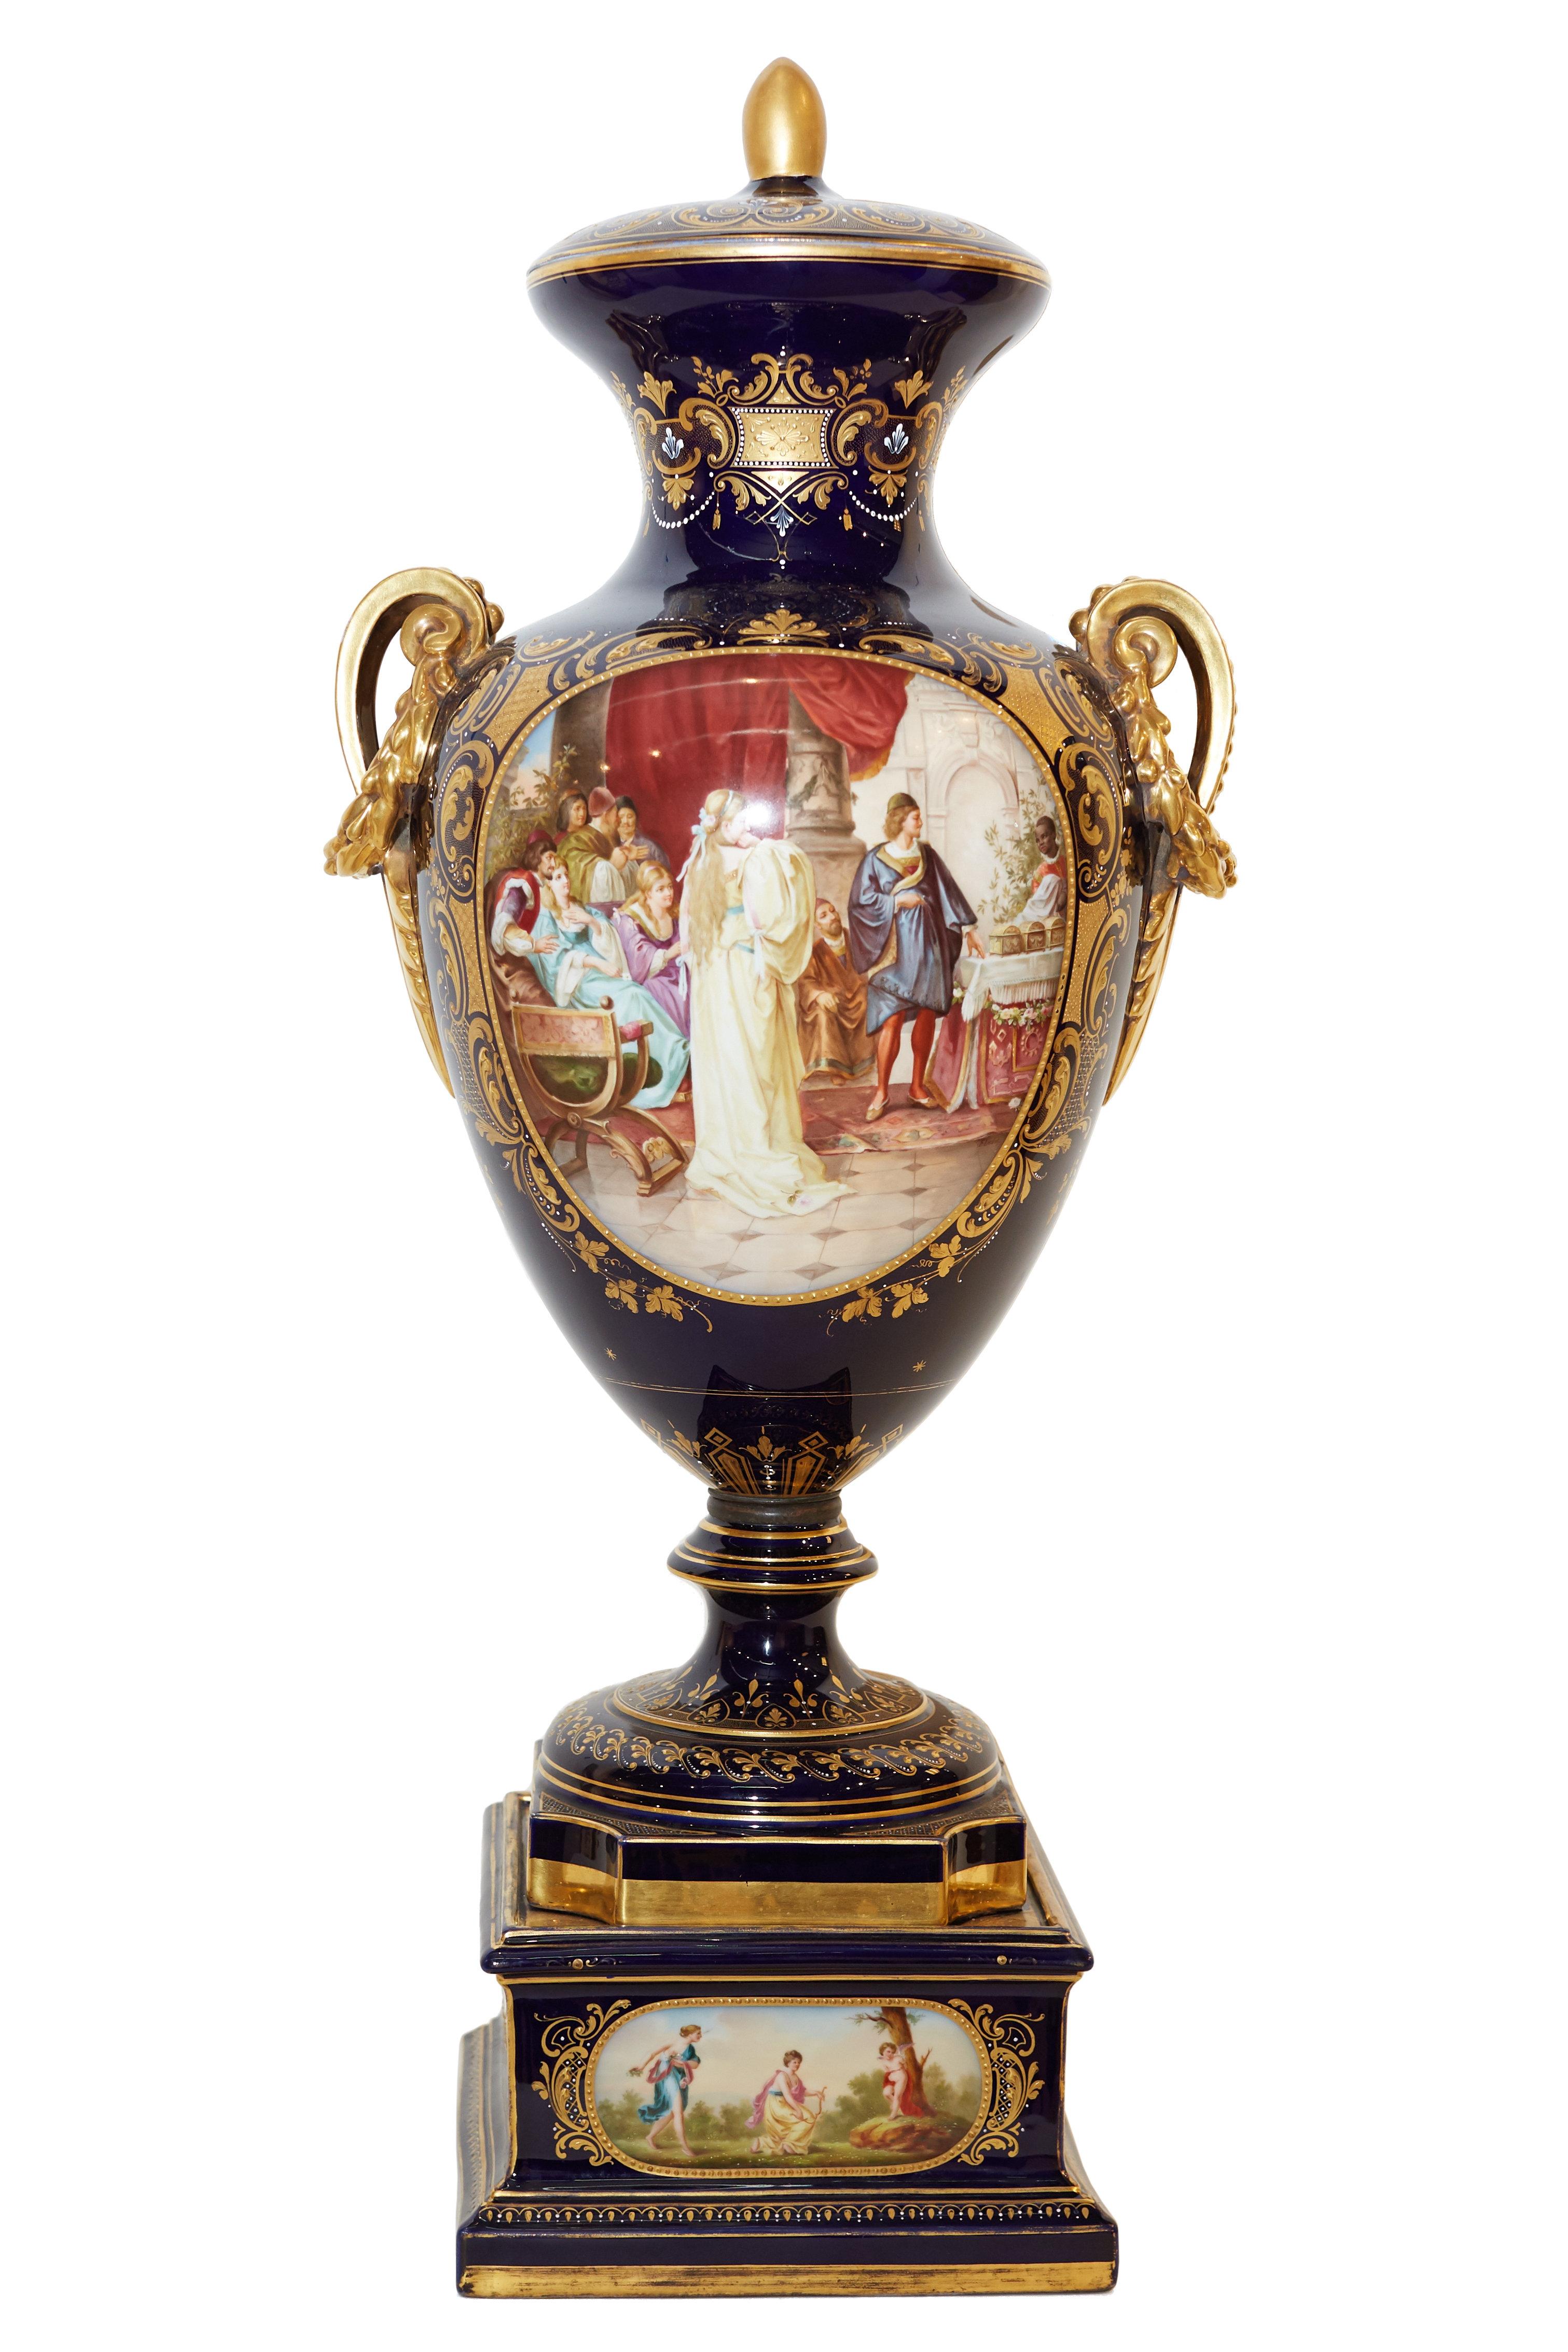 19th century Austrian Royal Vienna vase with lid with extensive gilding and hand painted cartouches depicting scenes from Shakespeare's The Merchant of Venice.